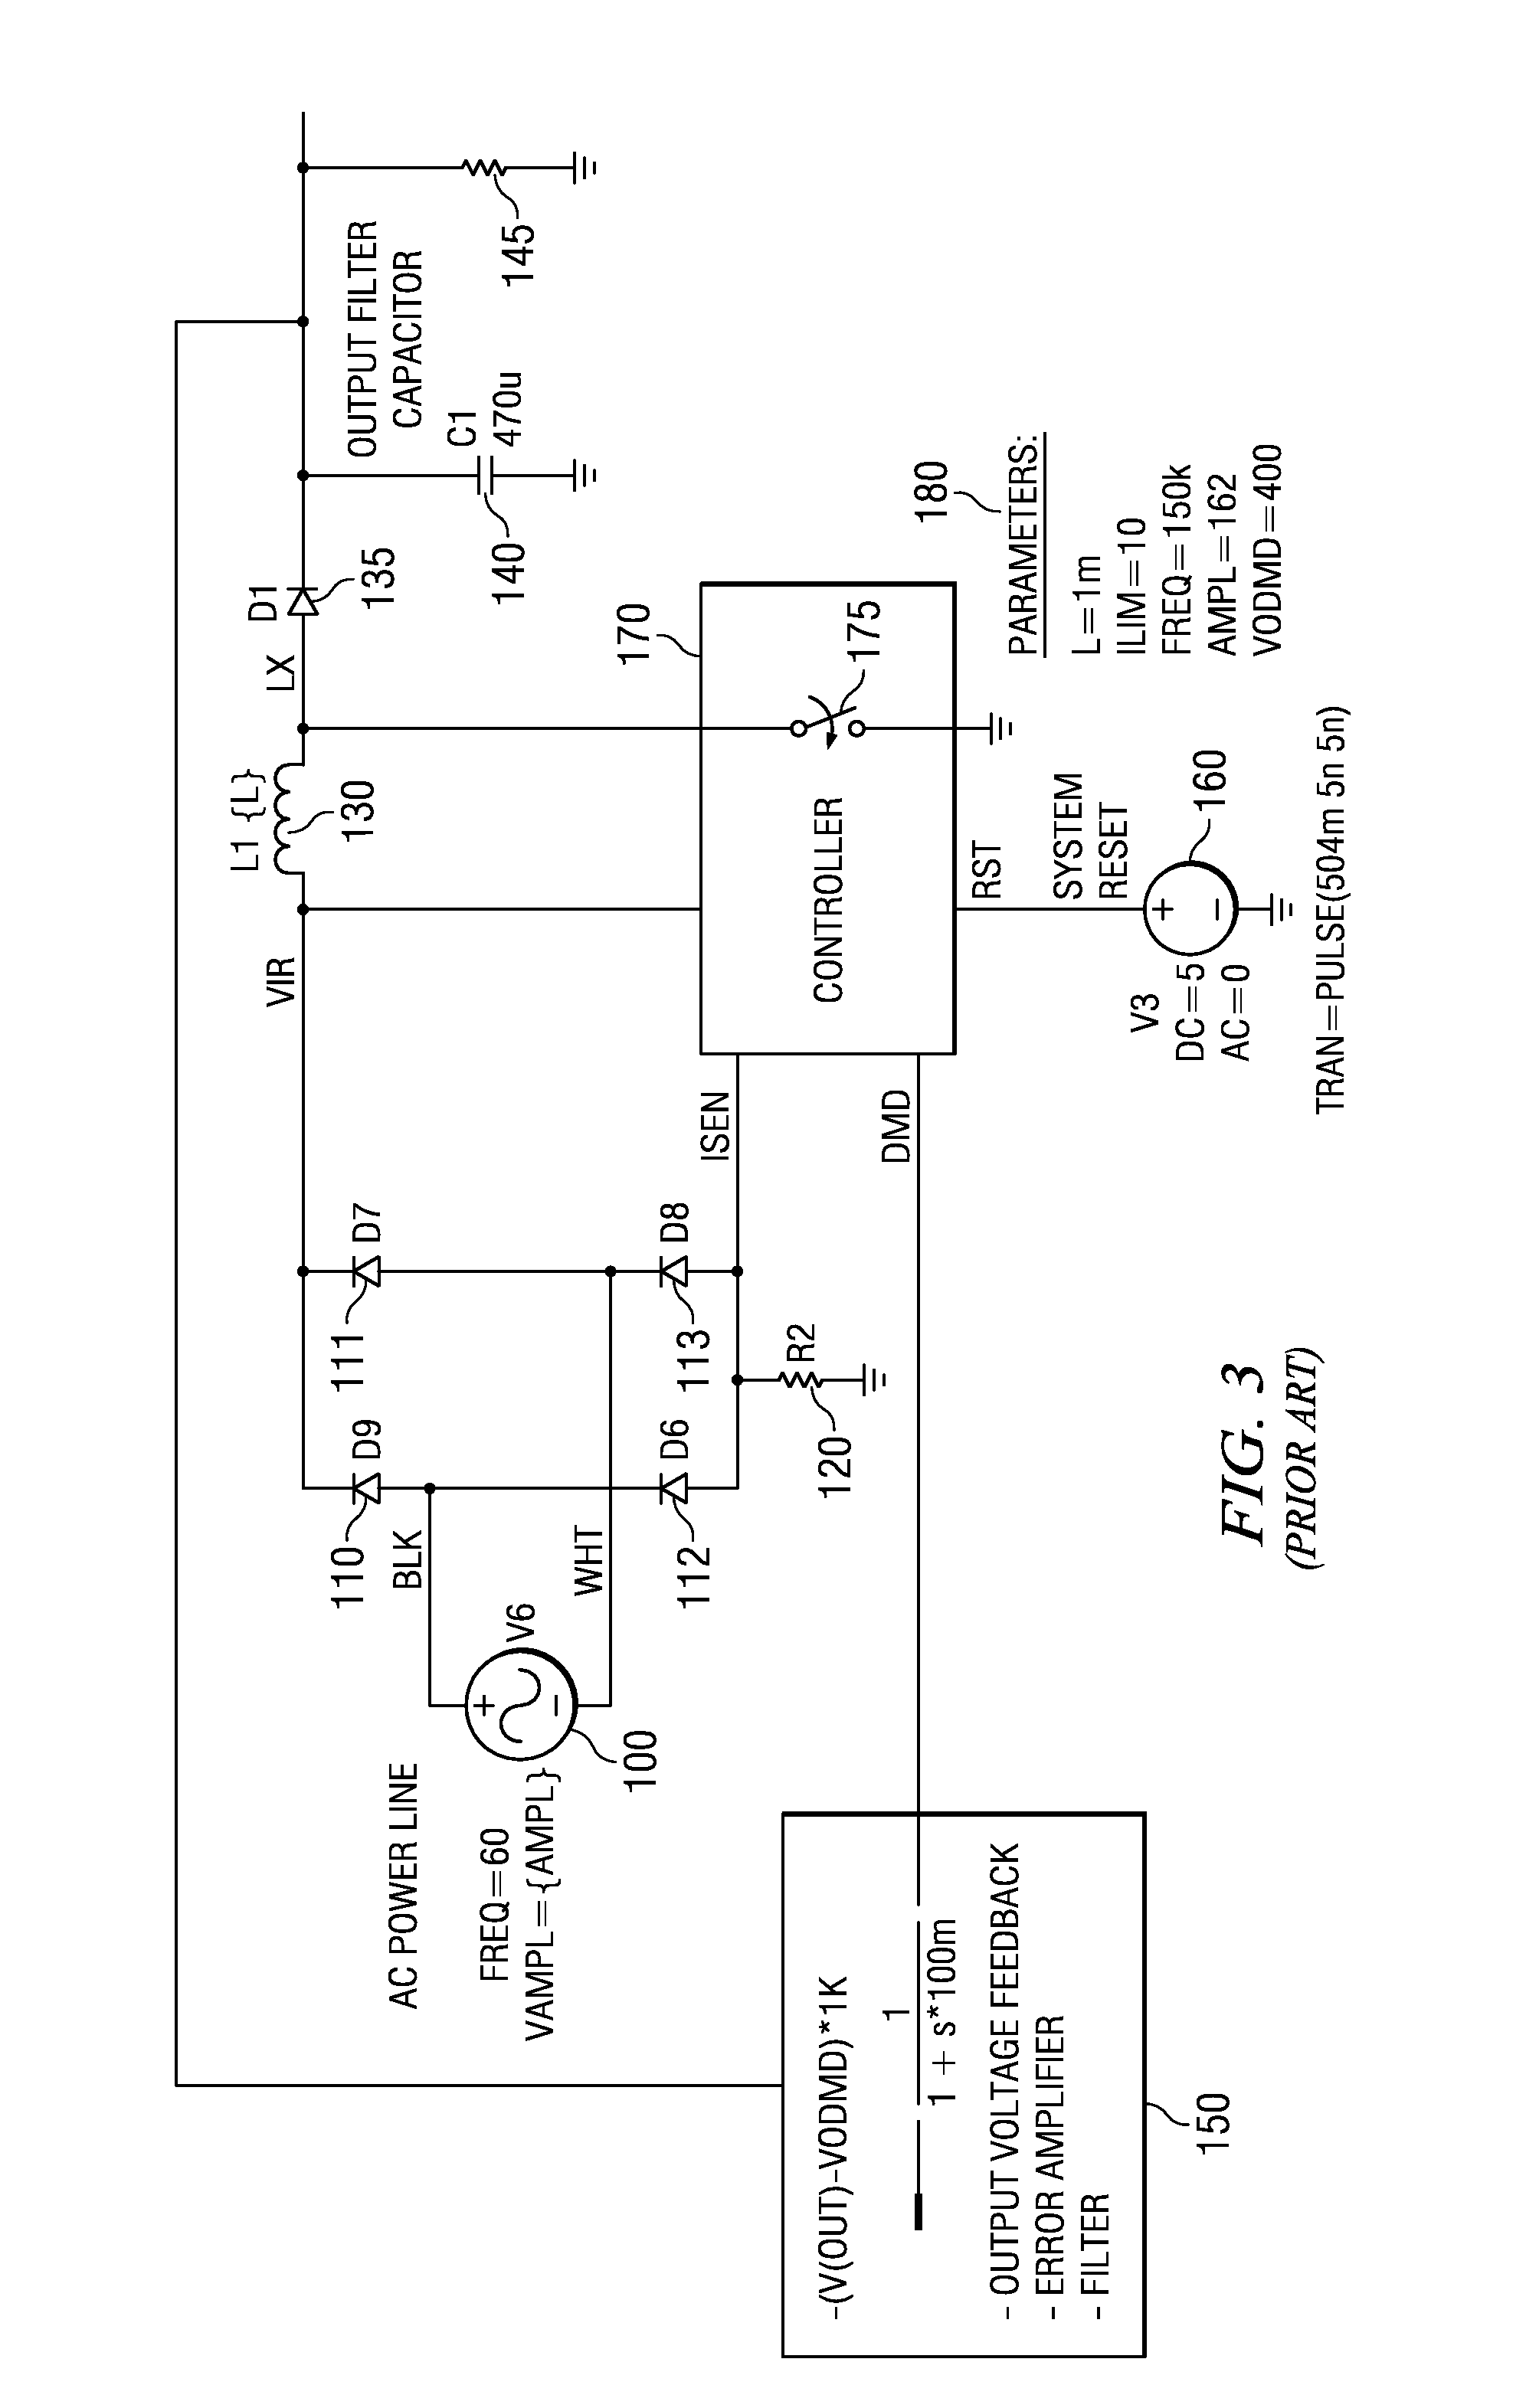 Method of power conversion and apparatus which achieves high power factor correction using ripple current mode control